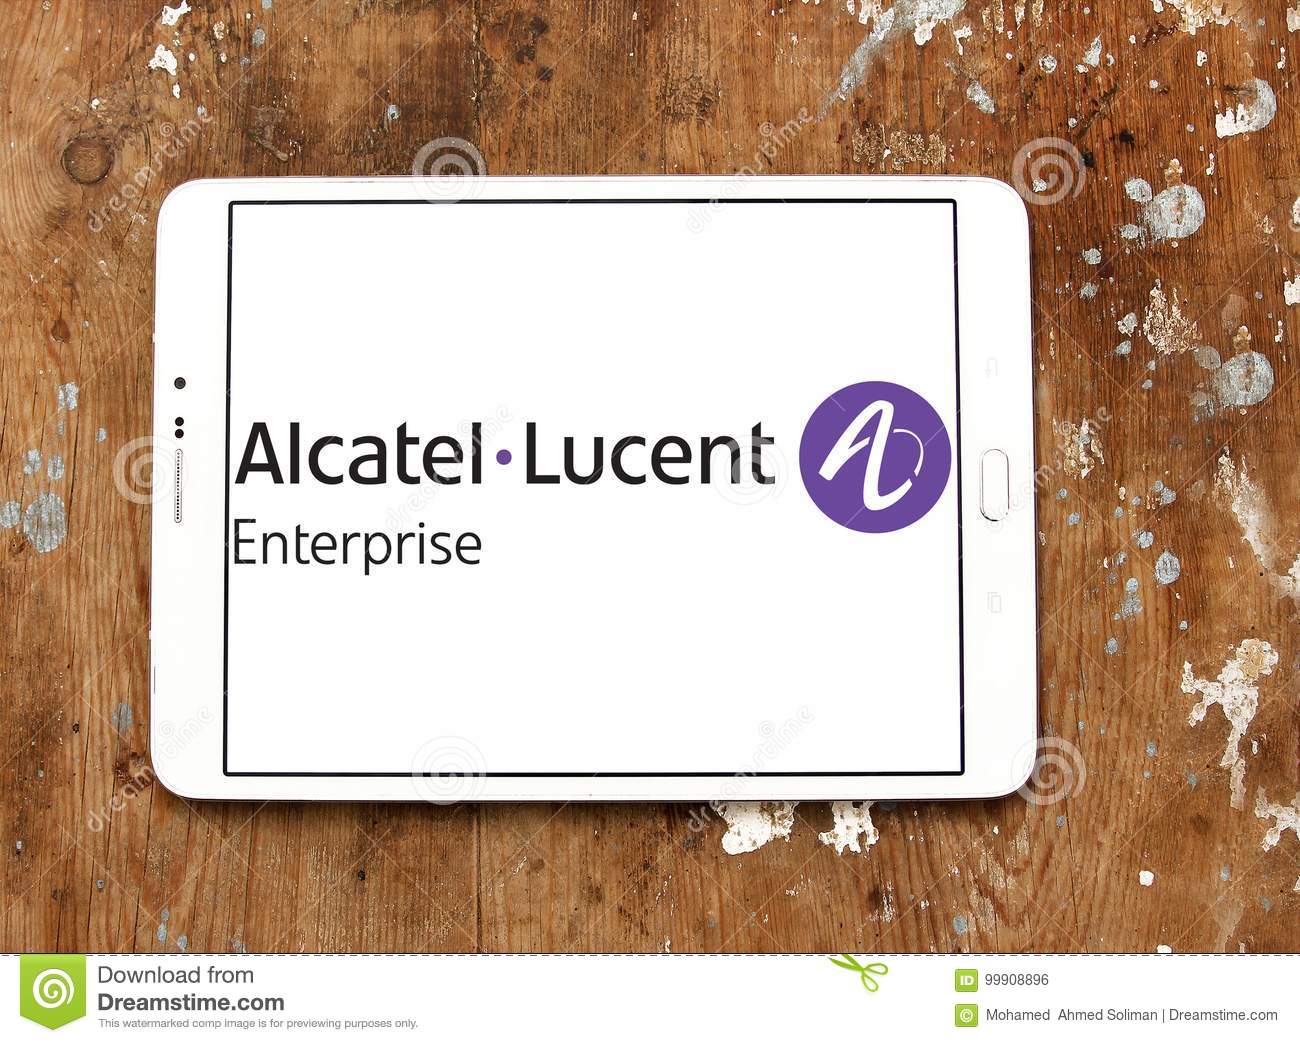 Alcatel lucent software